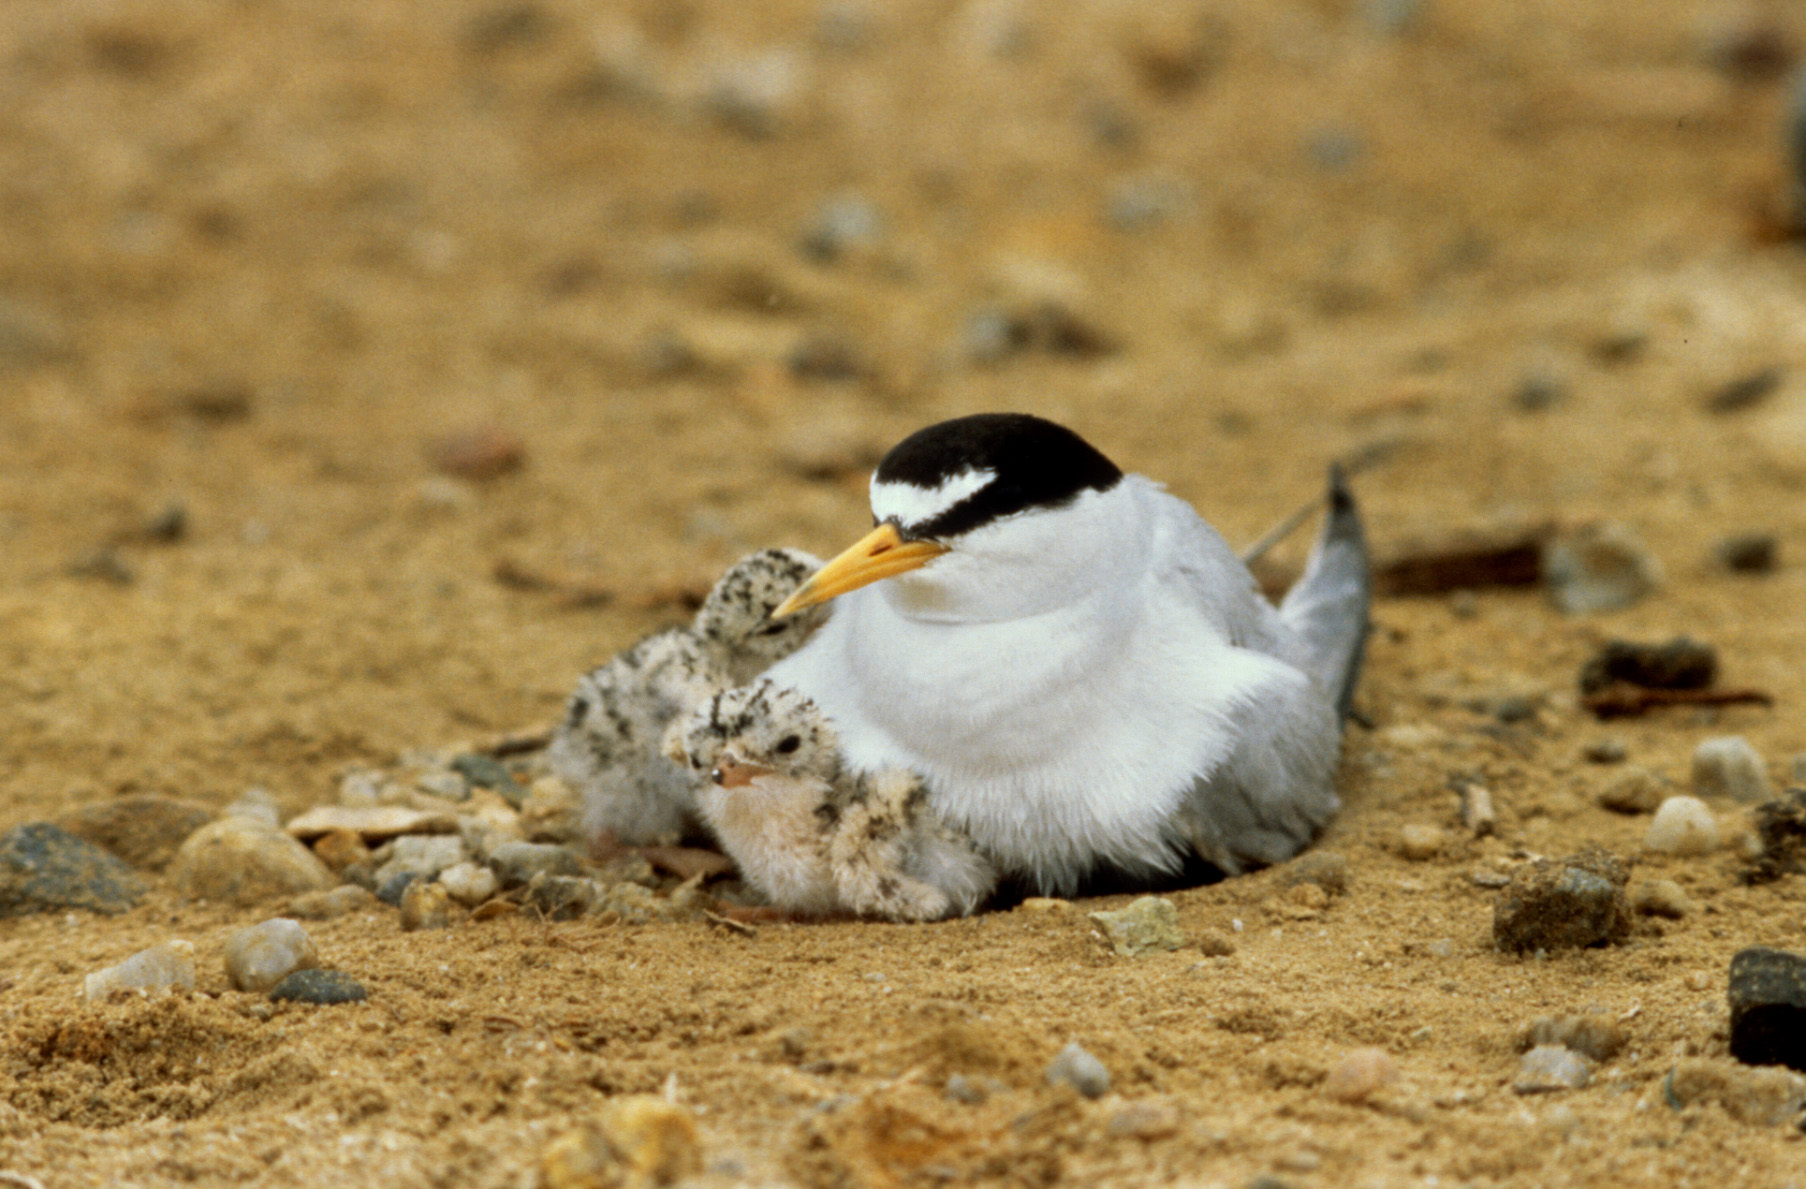 A black and white bird with an orange beak next to  two speckled chicks.